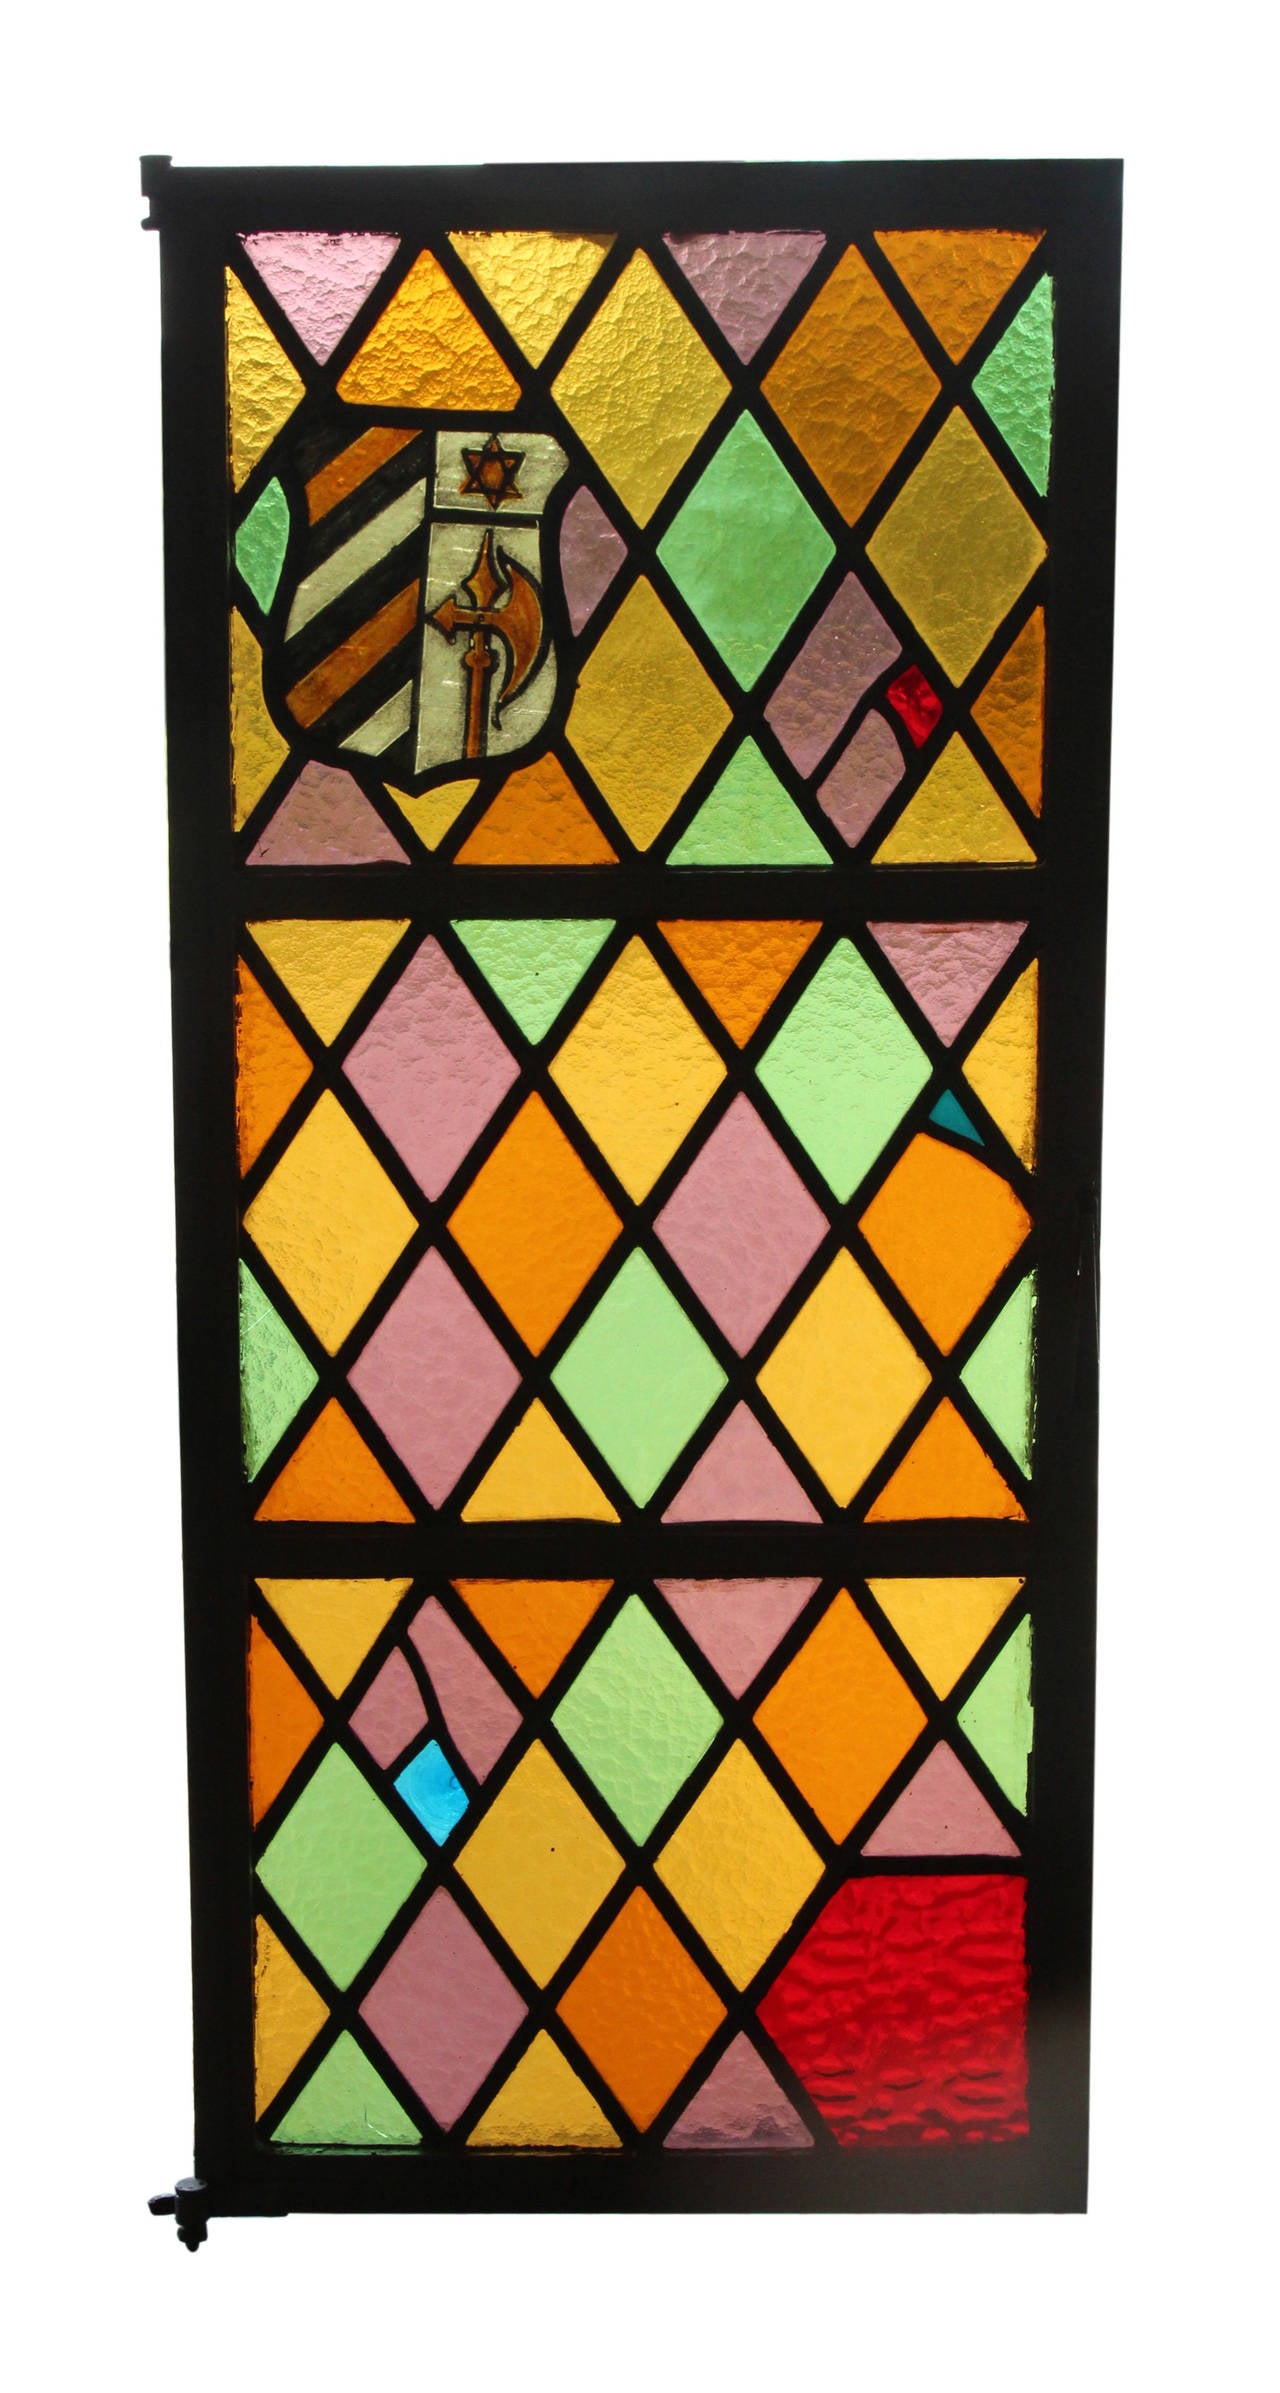 Painted 1920s Set of Eight Steel Stained Glass Windows from East 86th St. in Manhattan